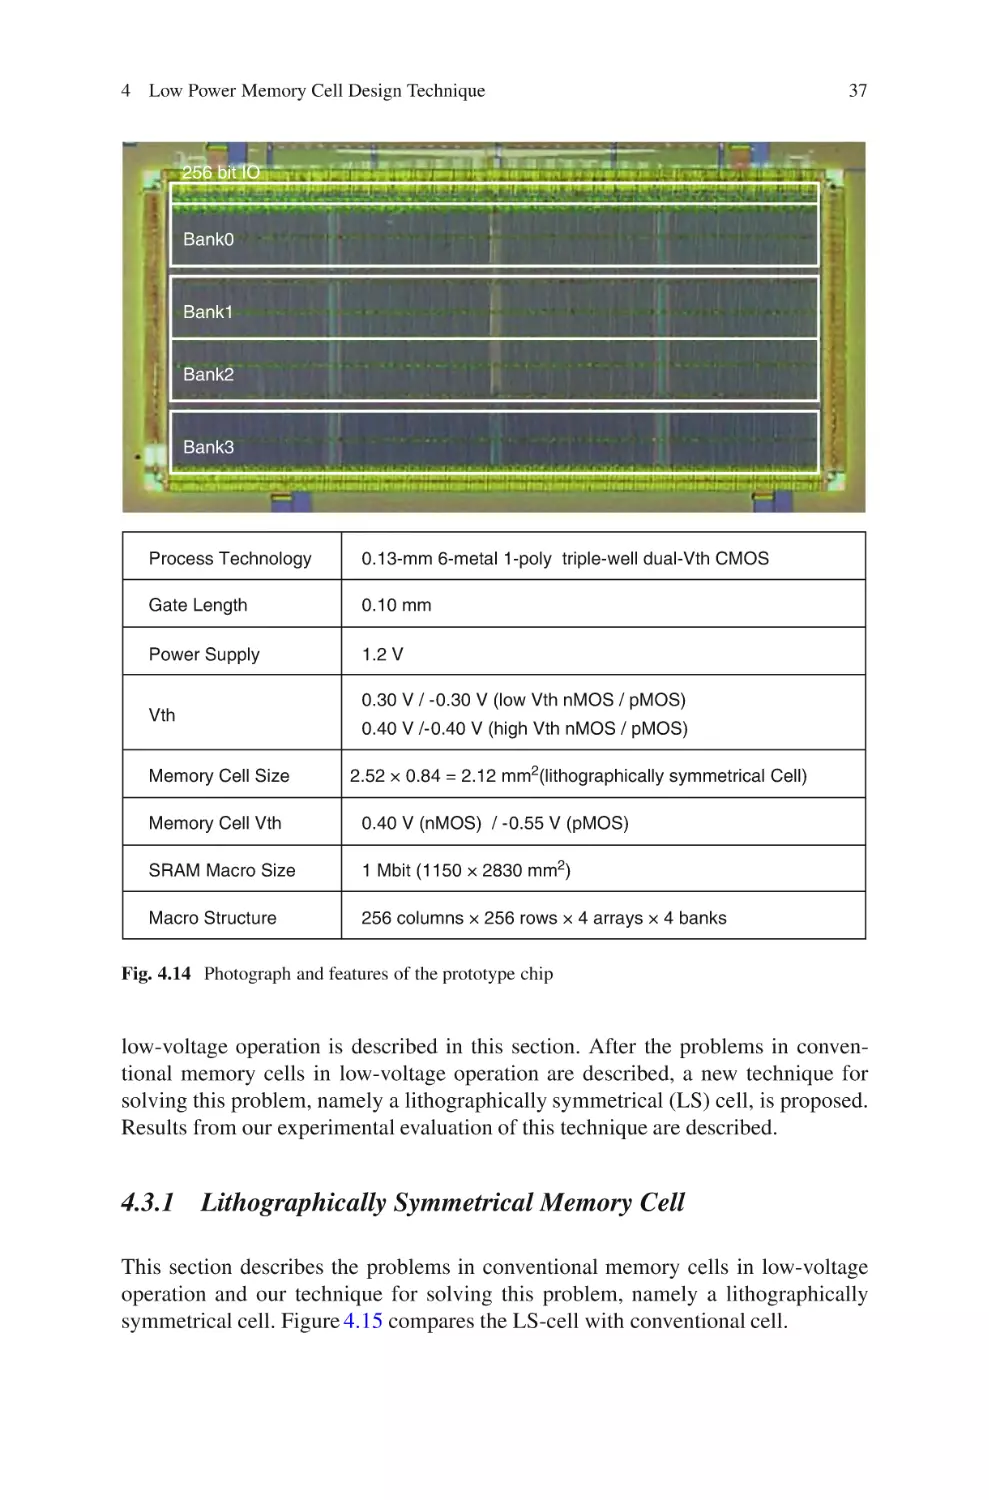 4.3.1 Lithographically Symmetrical Memory Cell